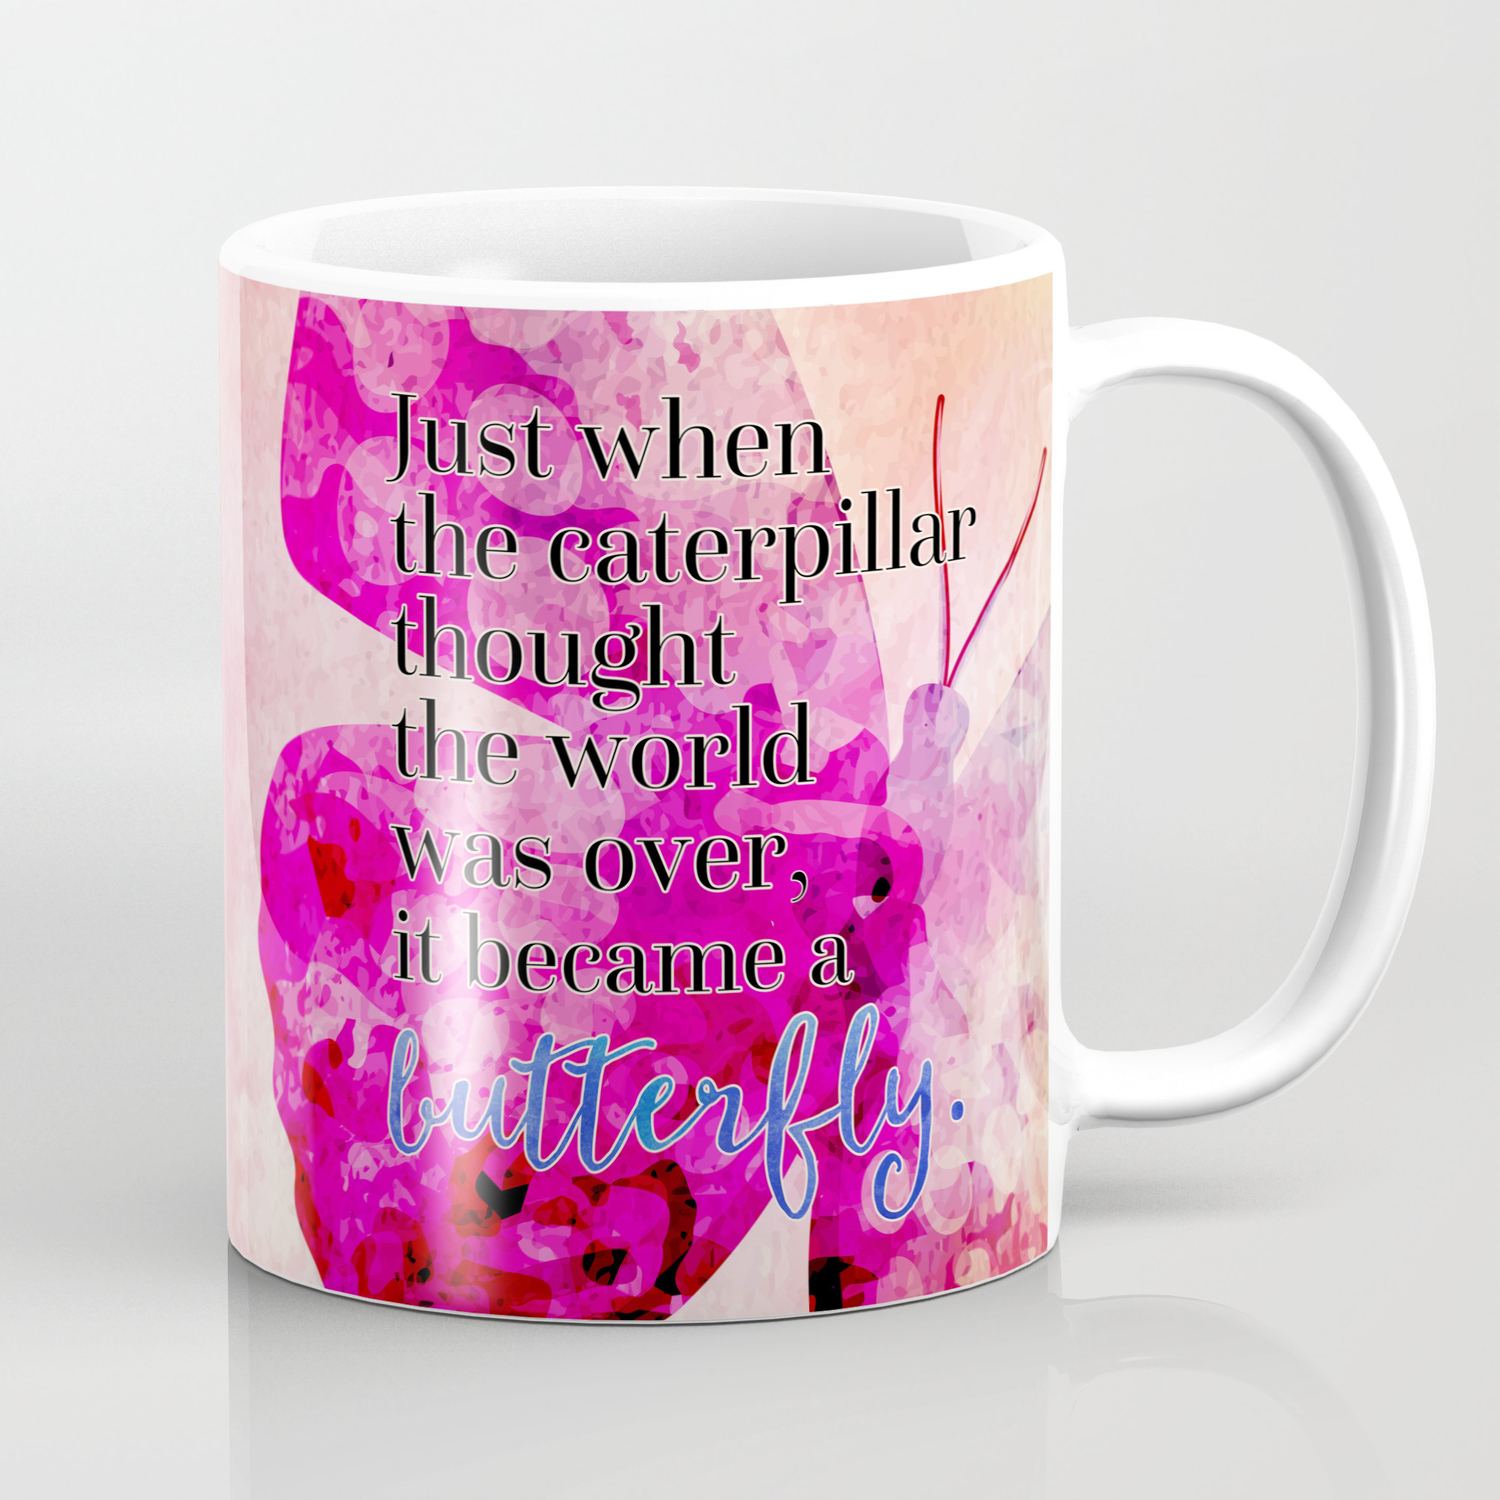 unique home decor motivational saying friend gift idea inspirational saying Time to be a butterfly novelty gift mug novelty coffee cup